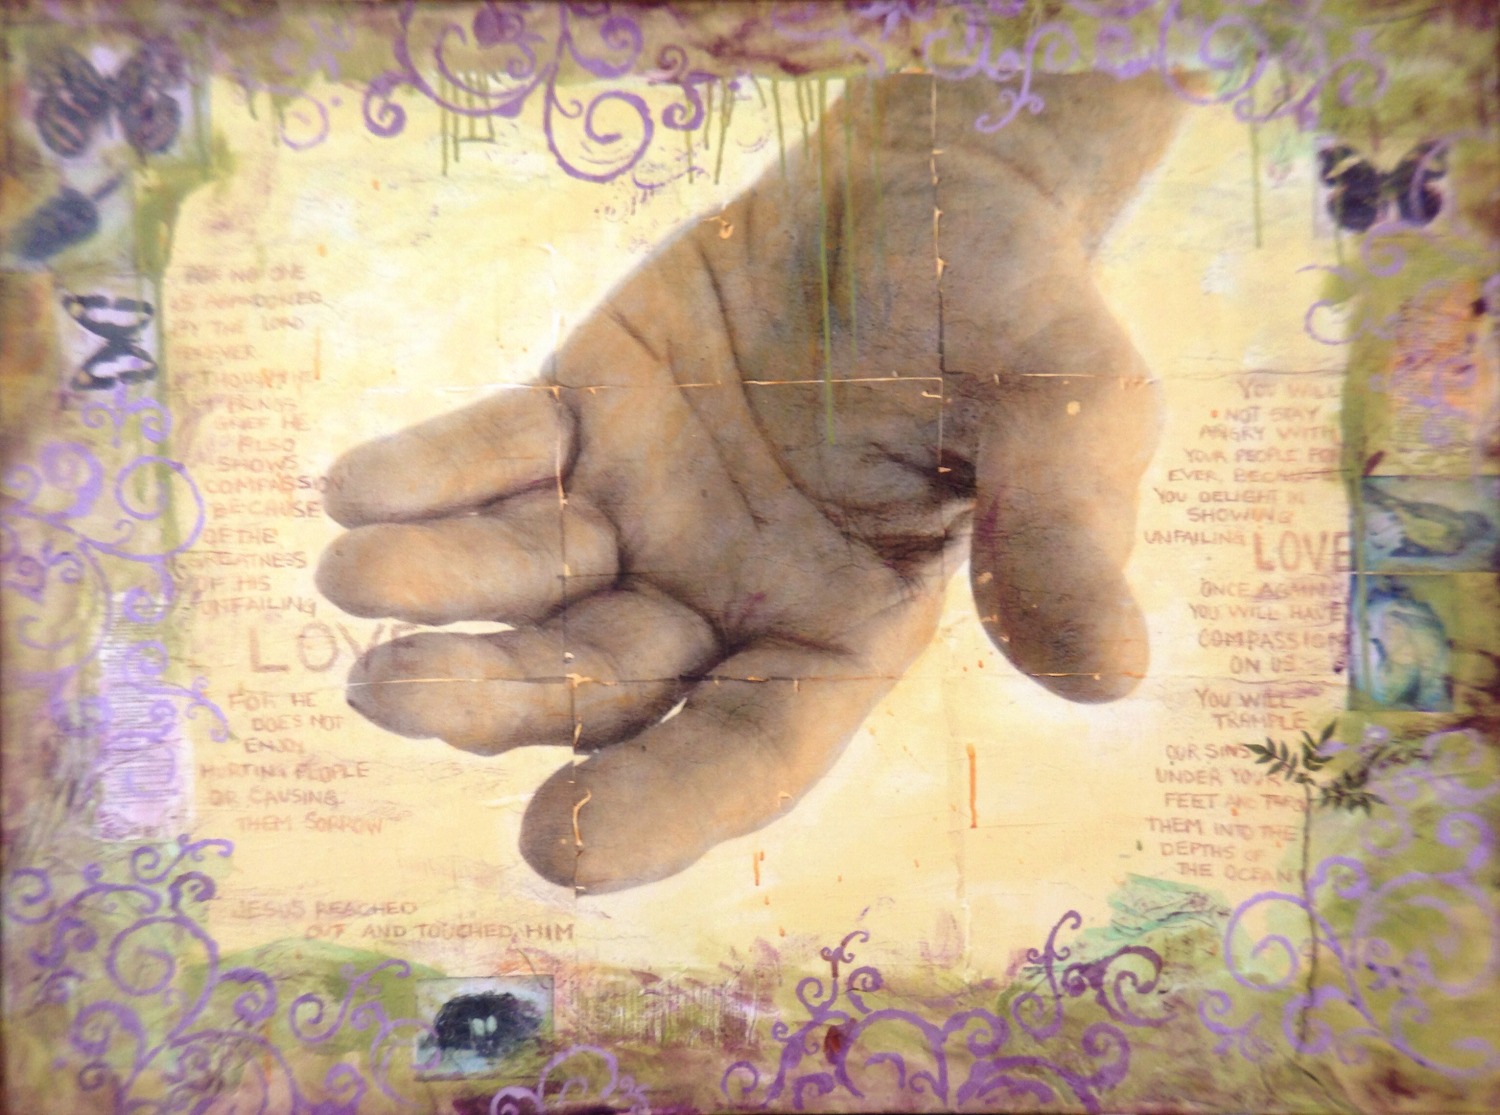 Reaching - photo transfers and mixed media on canvas by Judith Monroe